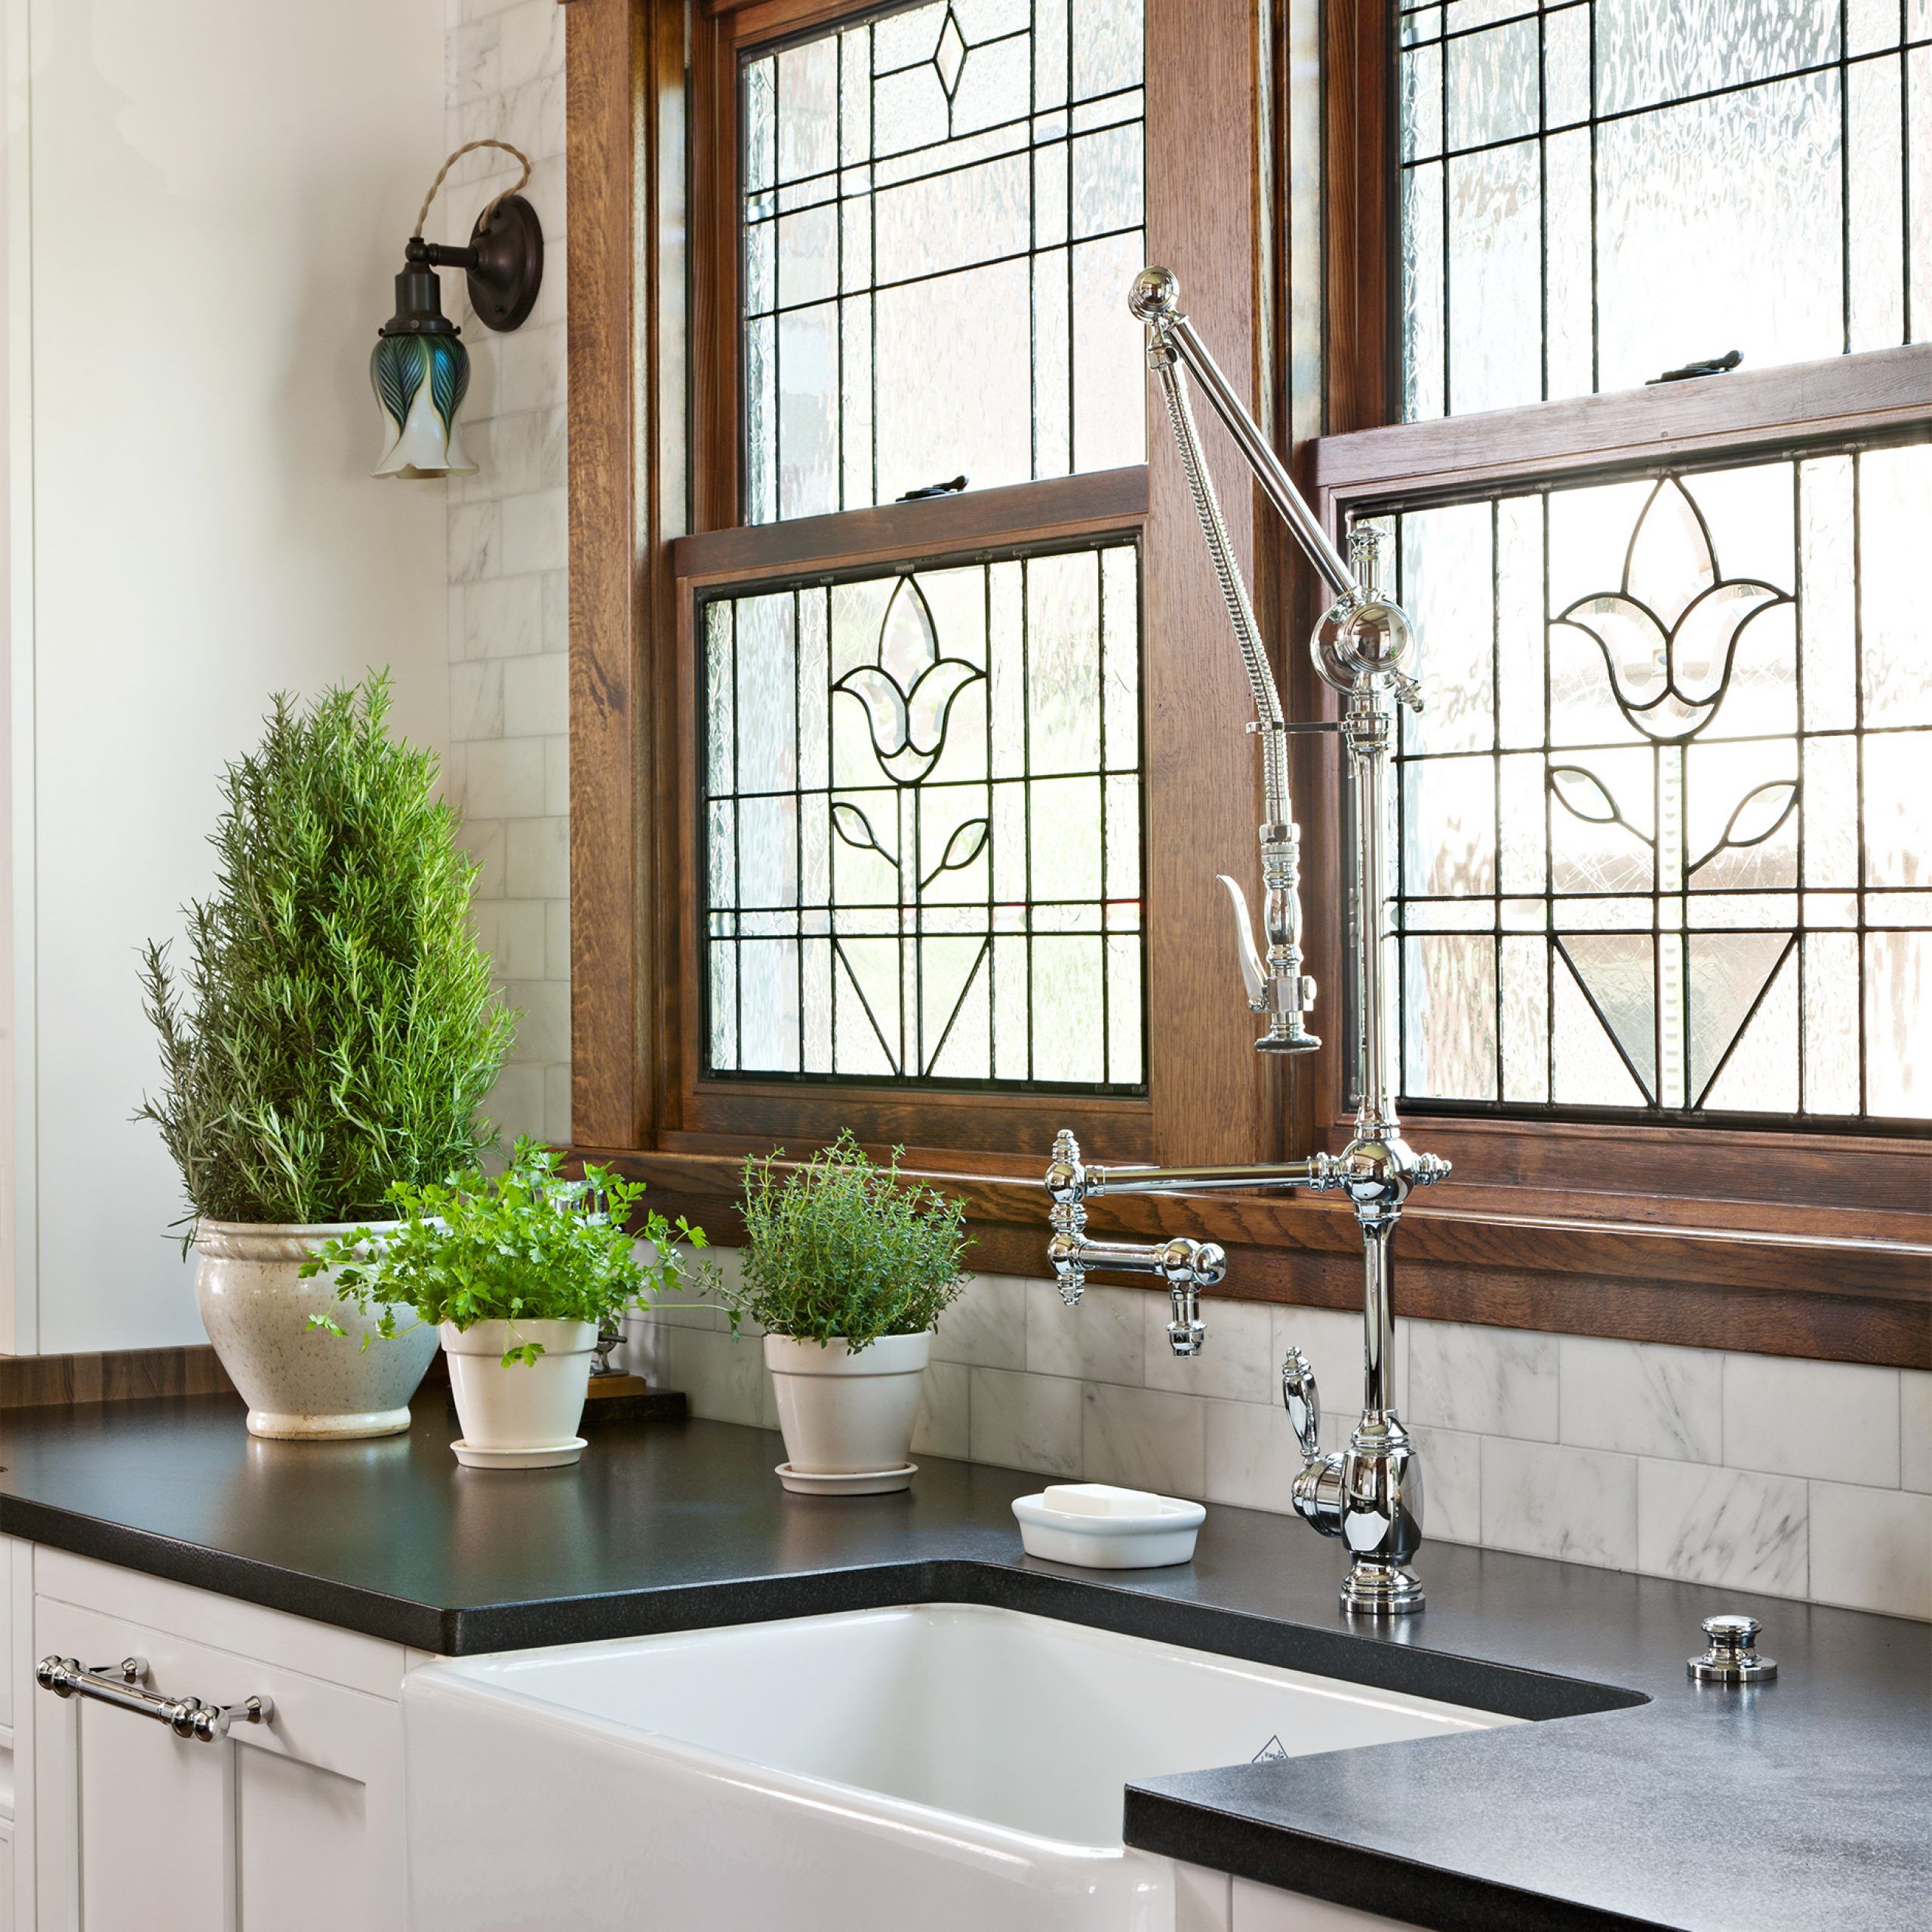 Classic Kitchen Curtain Sets Intended For Favorite 17 Rustic Window Treatments You'll Want To Try Now (View 18 of 20)